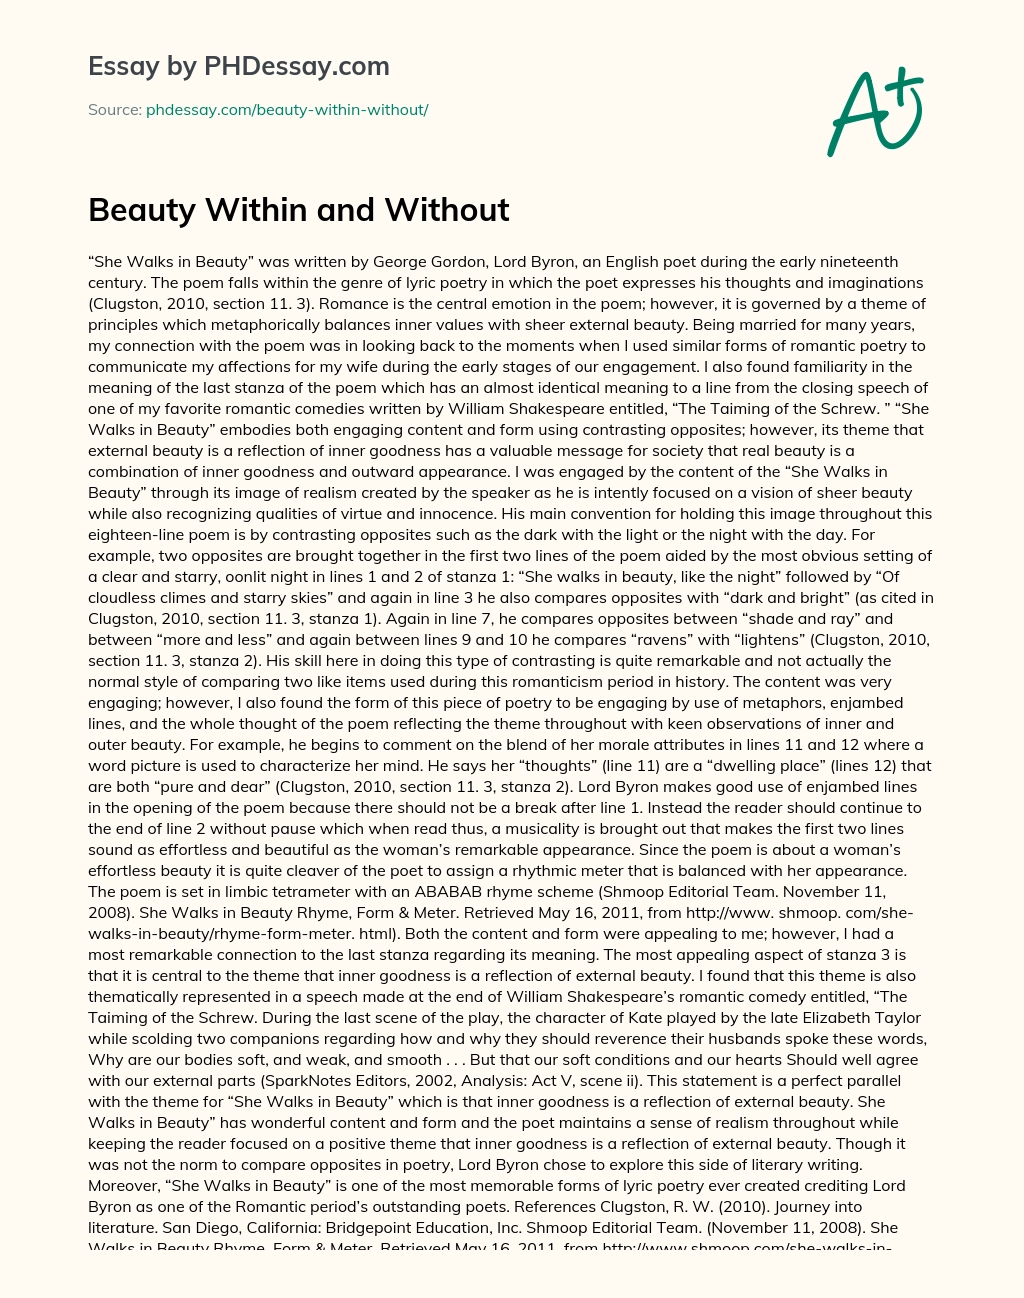 Beauty Within and Without essay